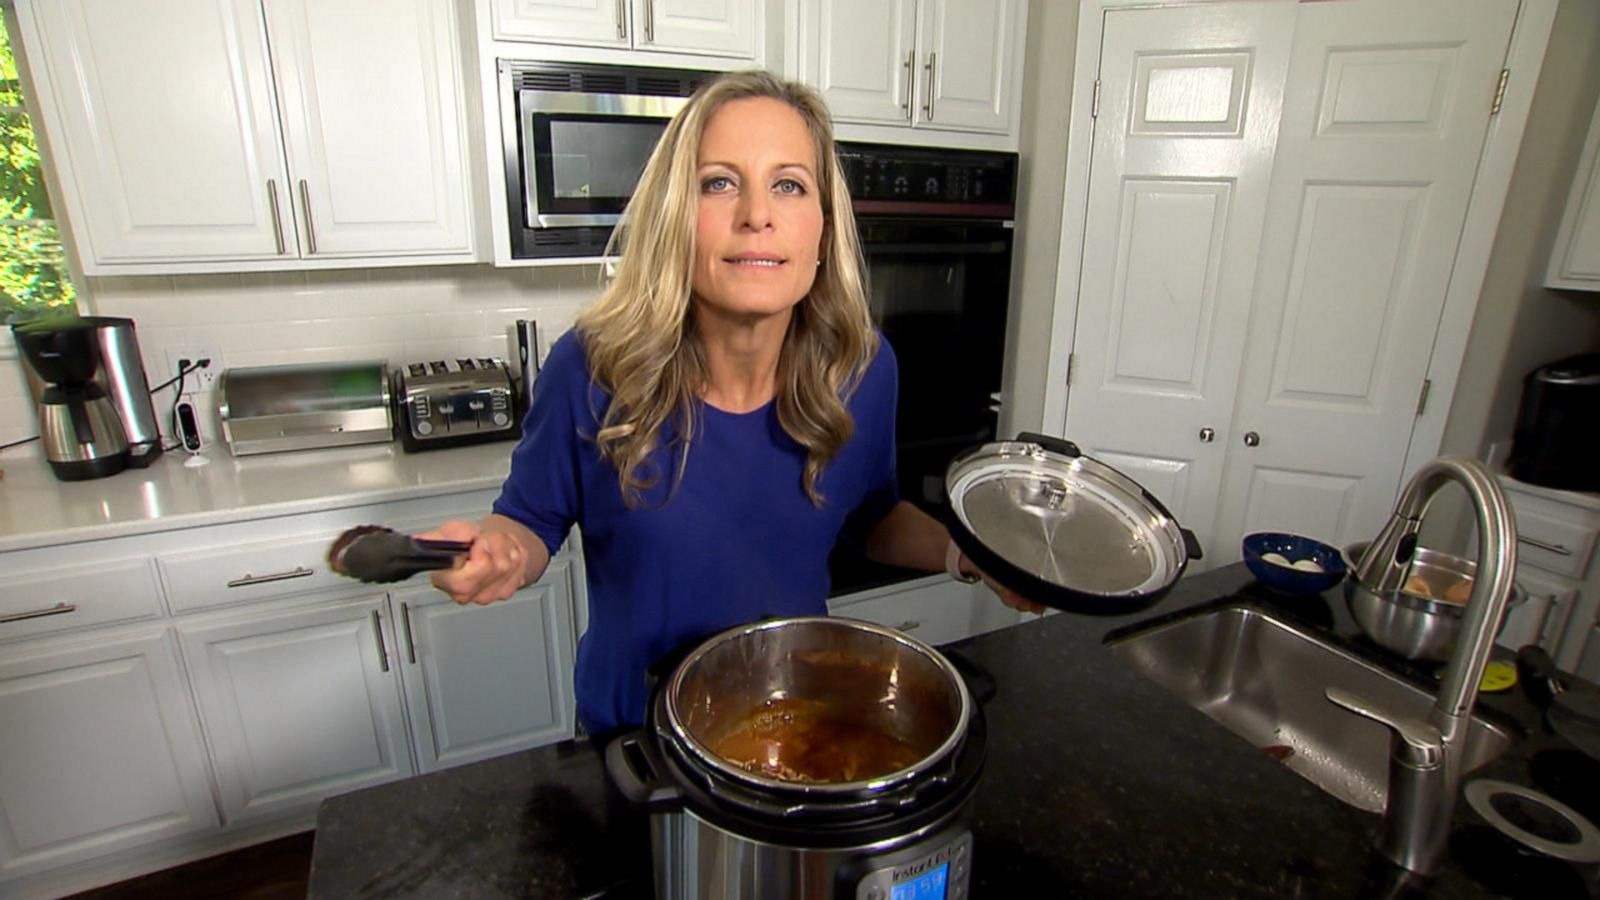 Supercharge your kitchen with these gadgets and hacks - Good Morning America